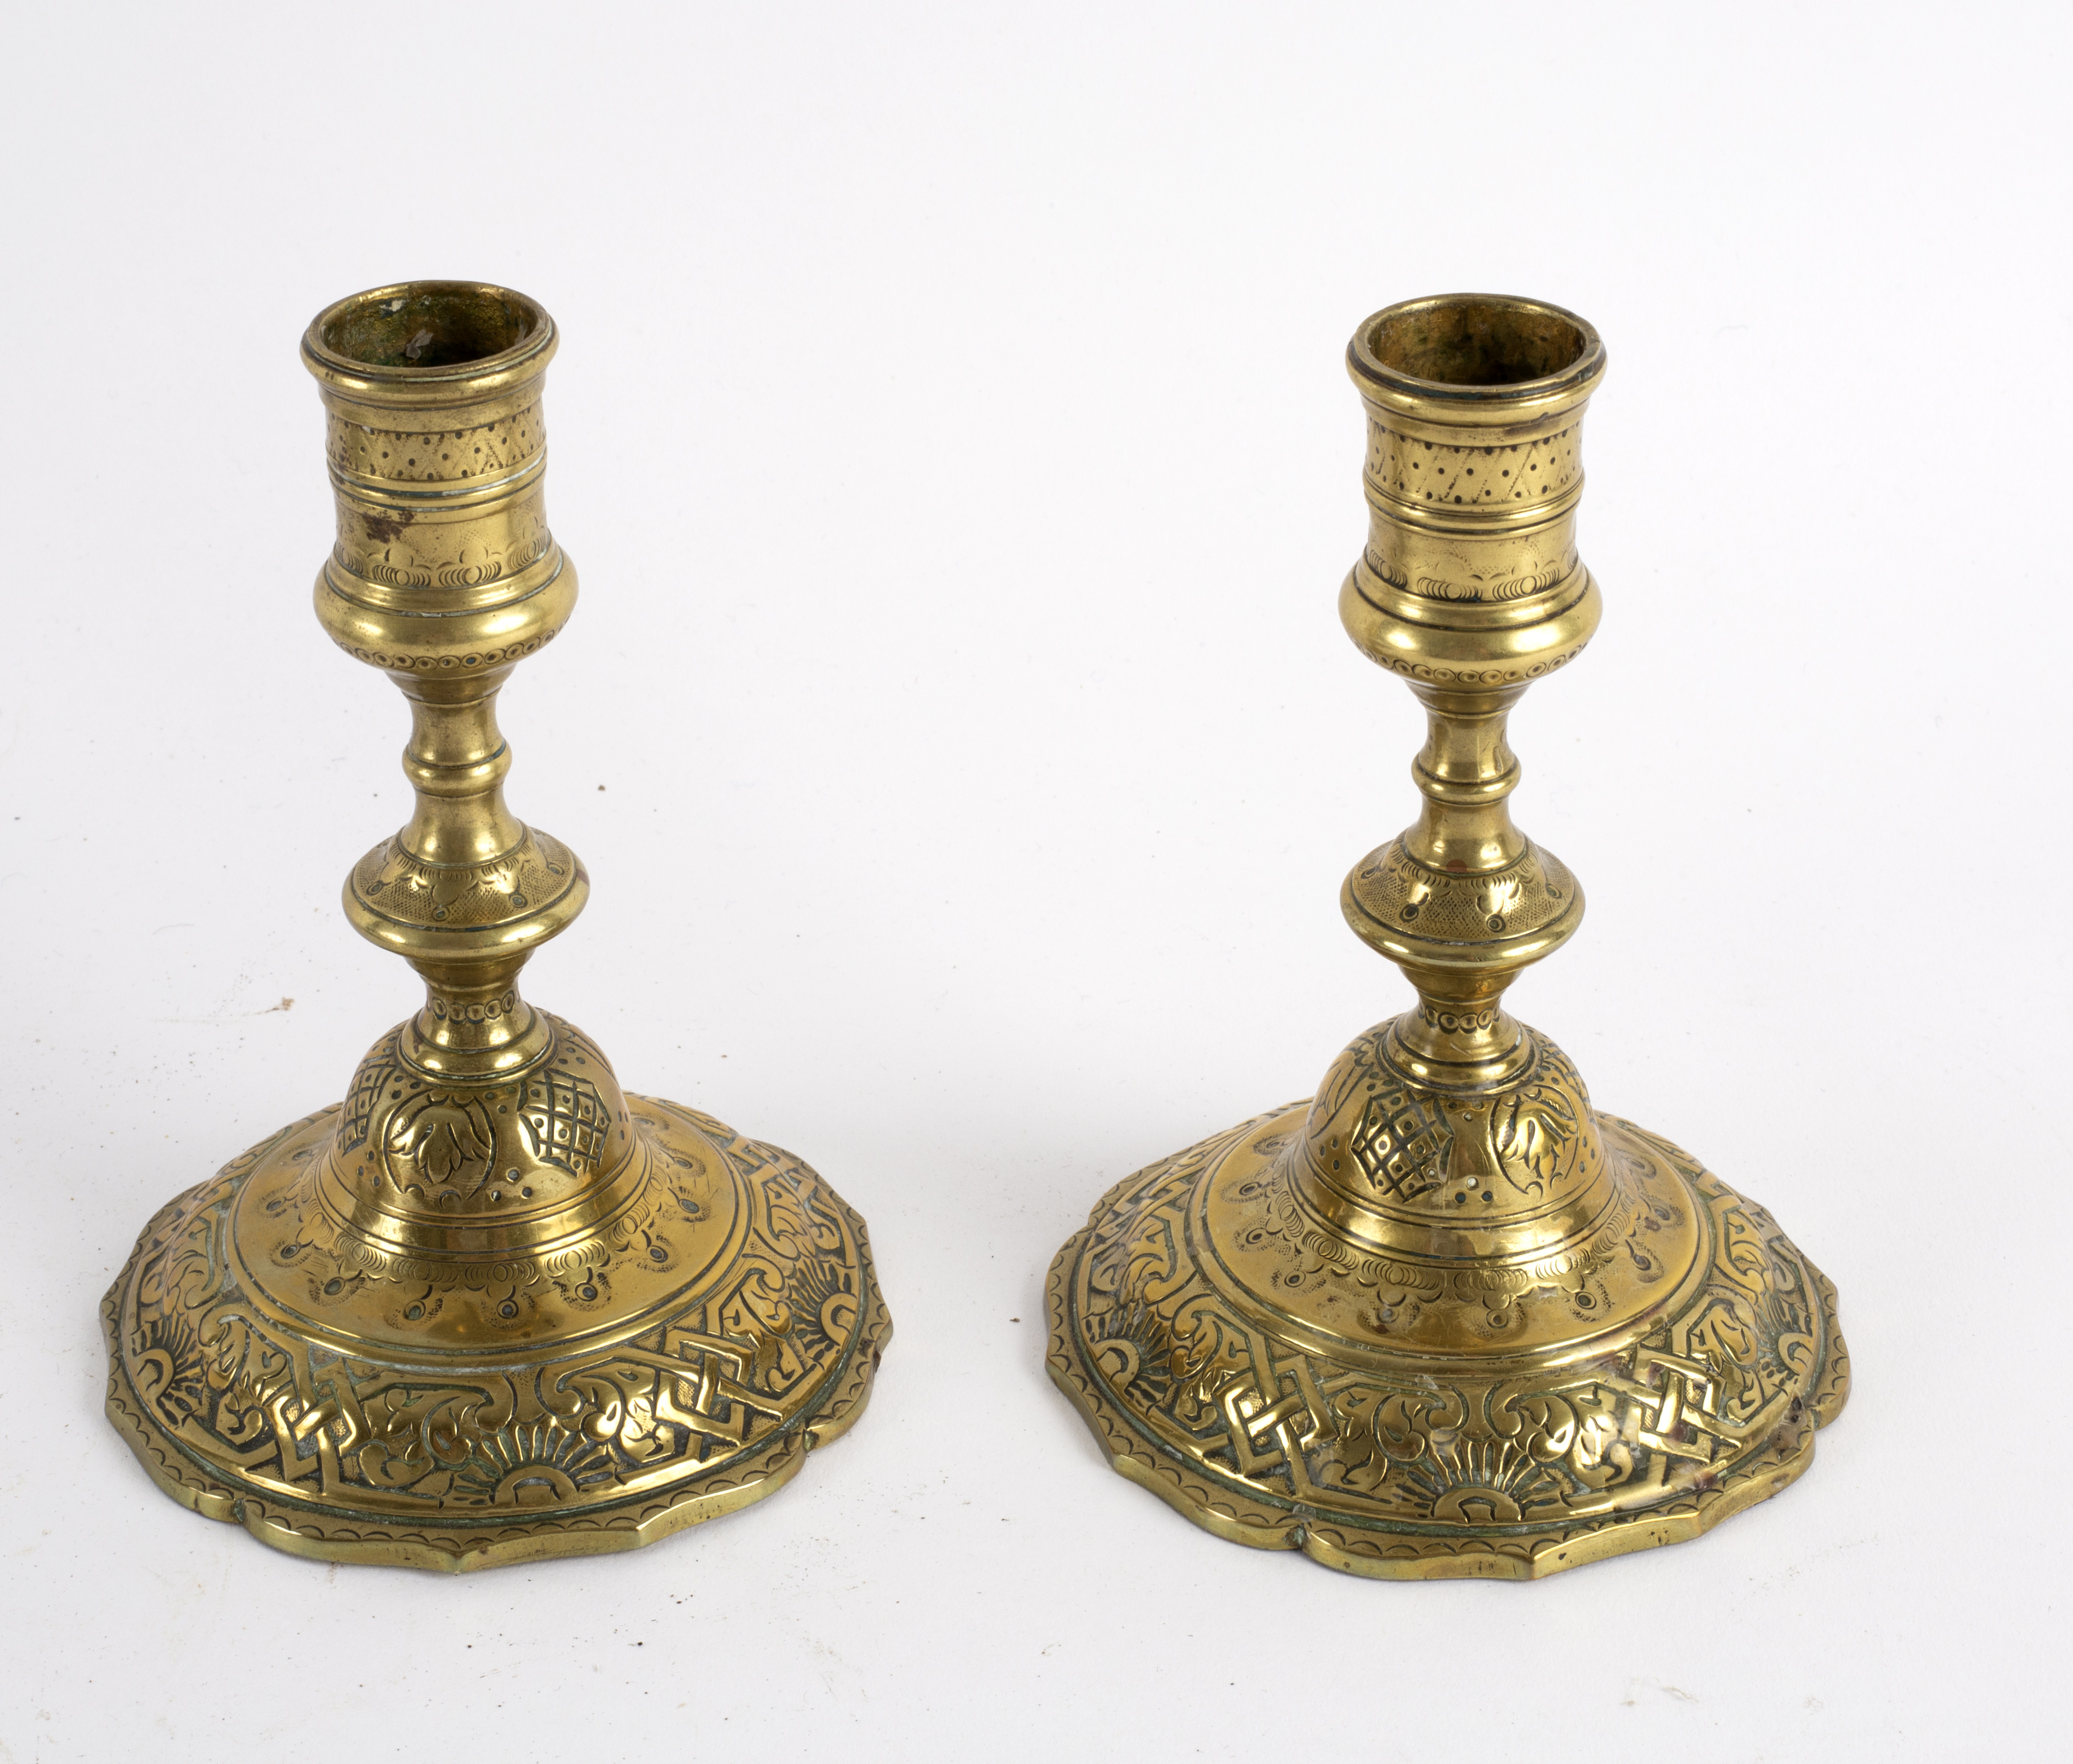 A pair of engraved brass candlesticks on skirt bases, 14.